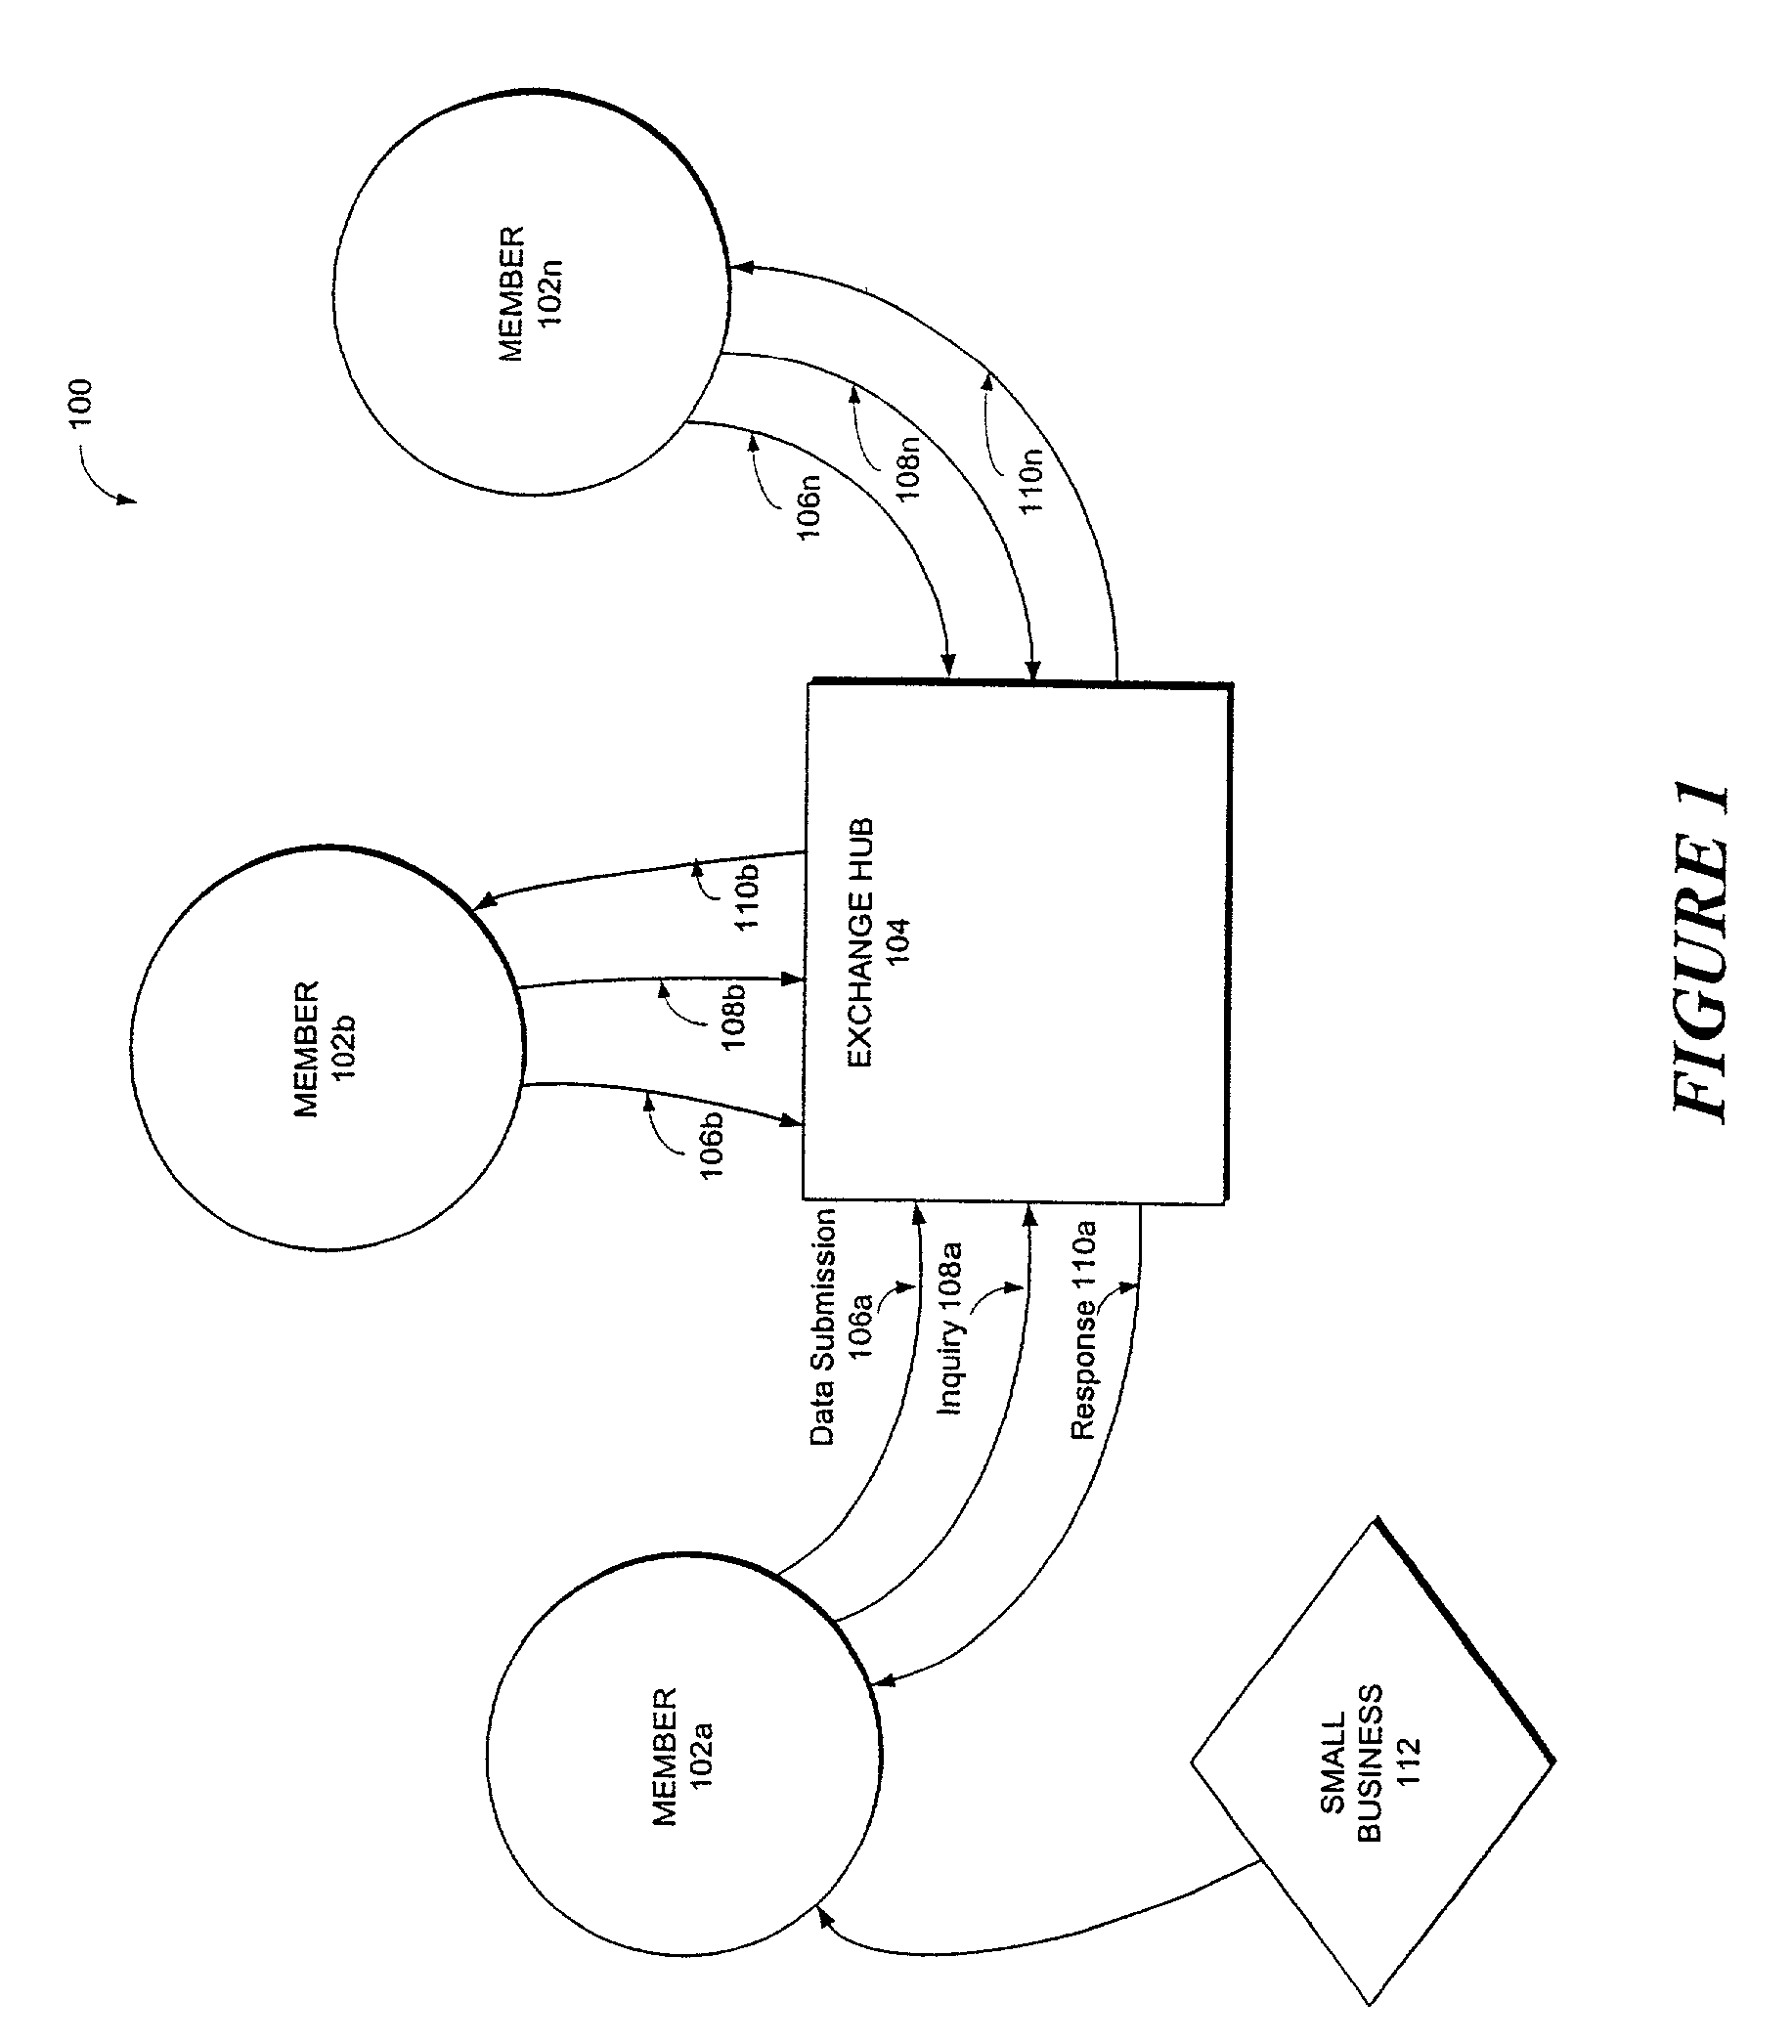 System and method for facilitating reciprocative small business financial information exchanges